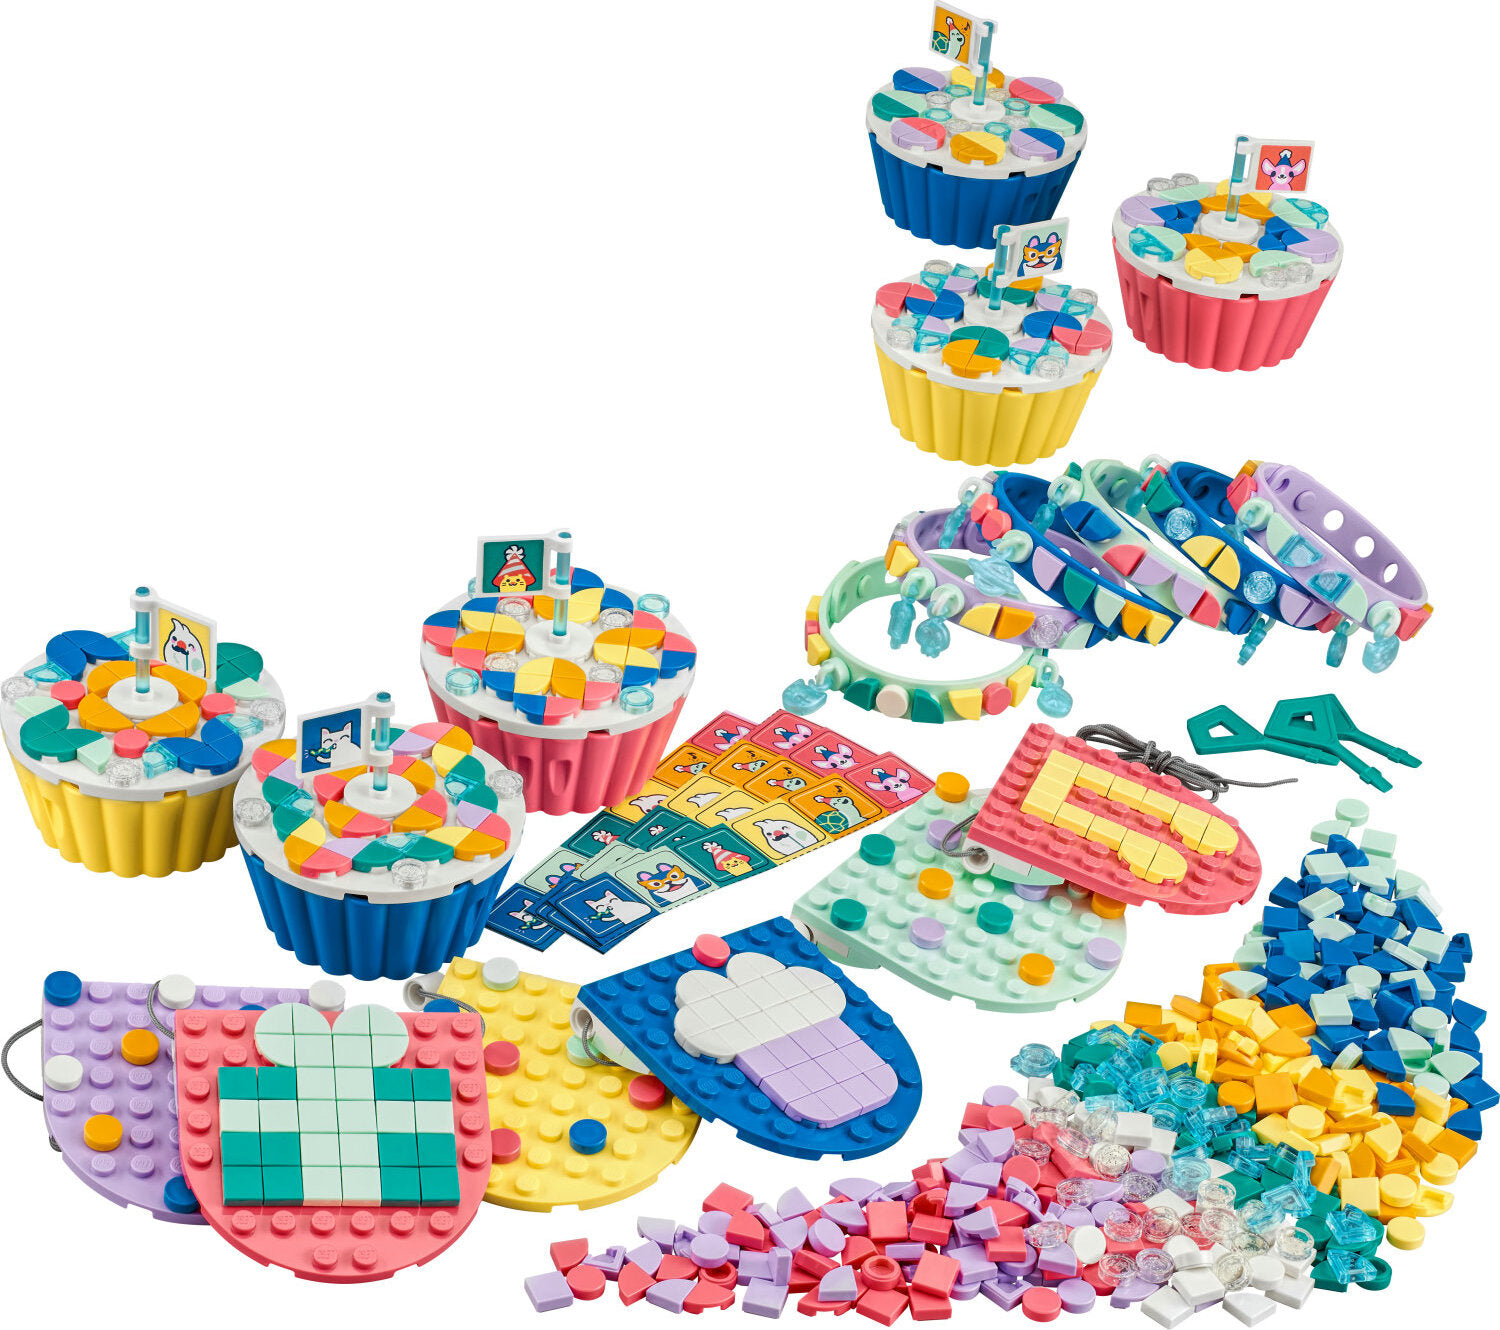 LEGO® DOTS: Ultimate Party Kit